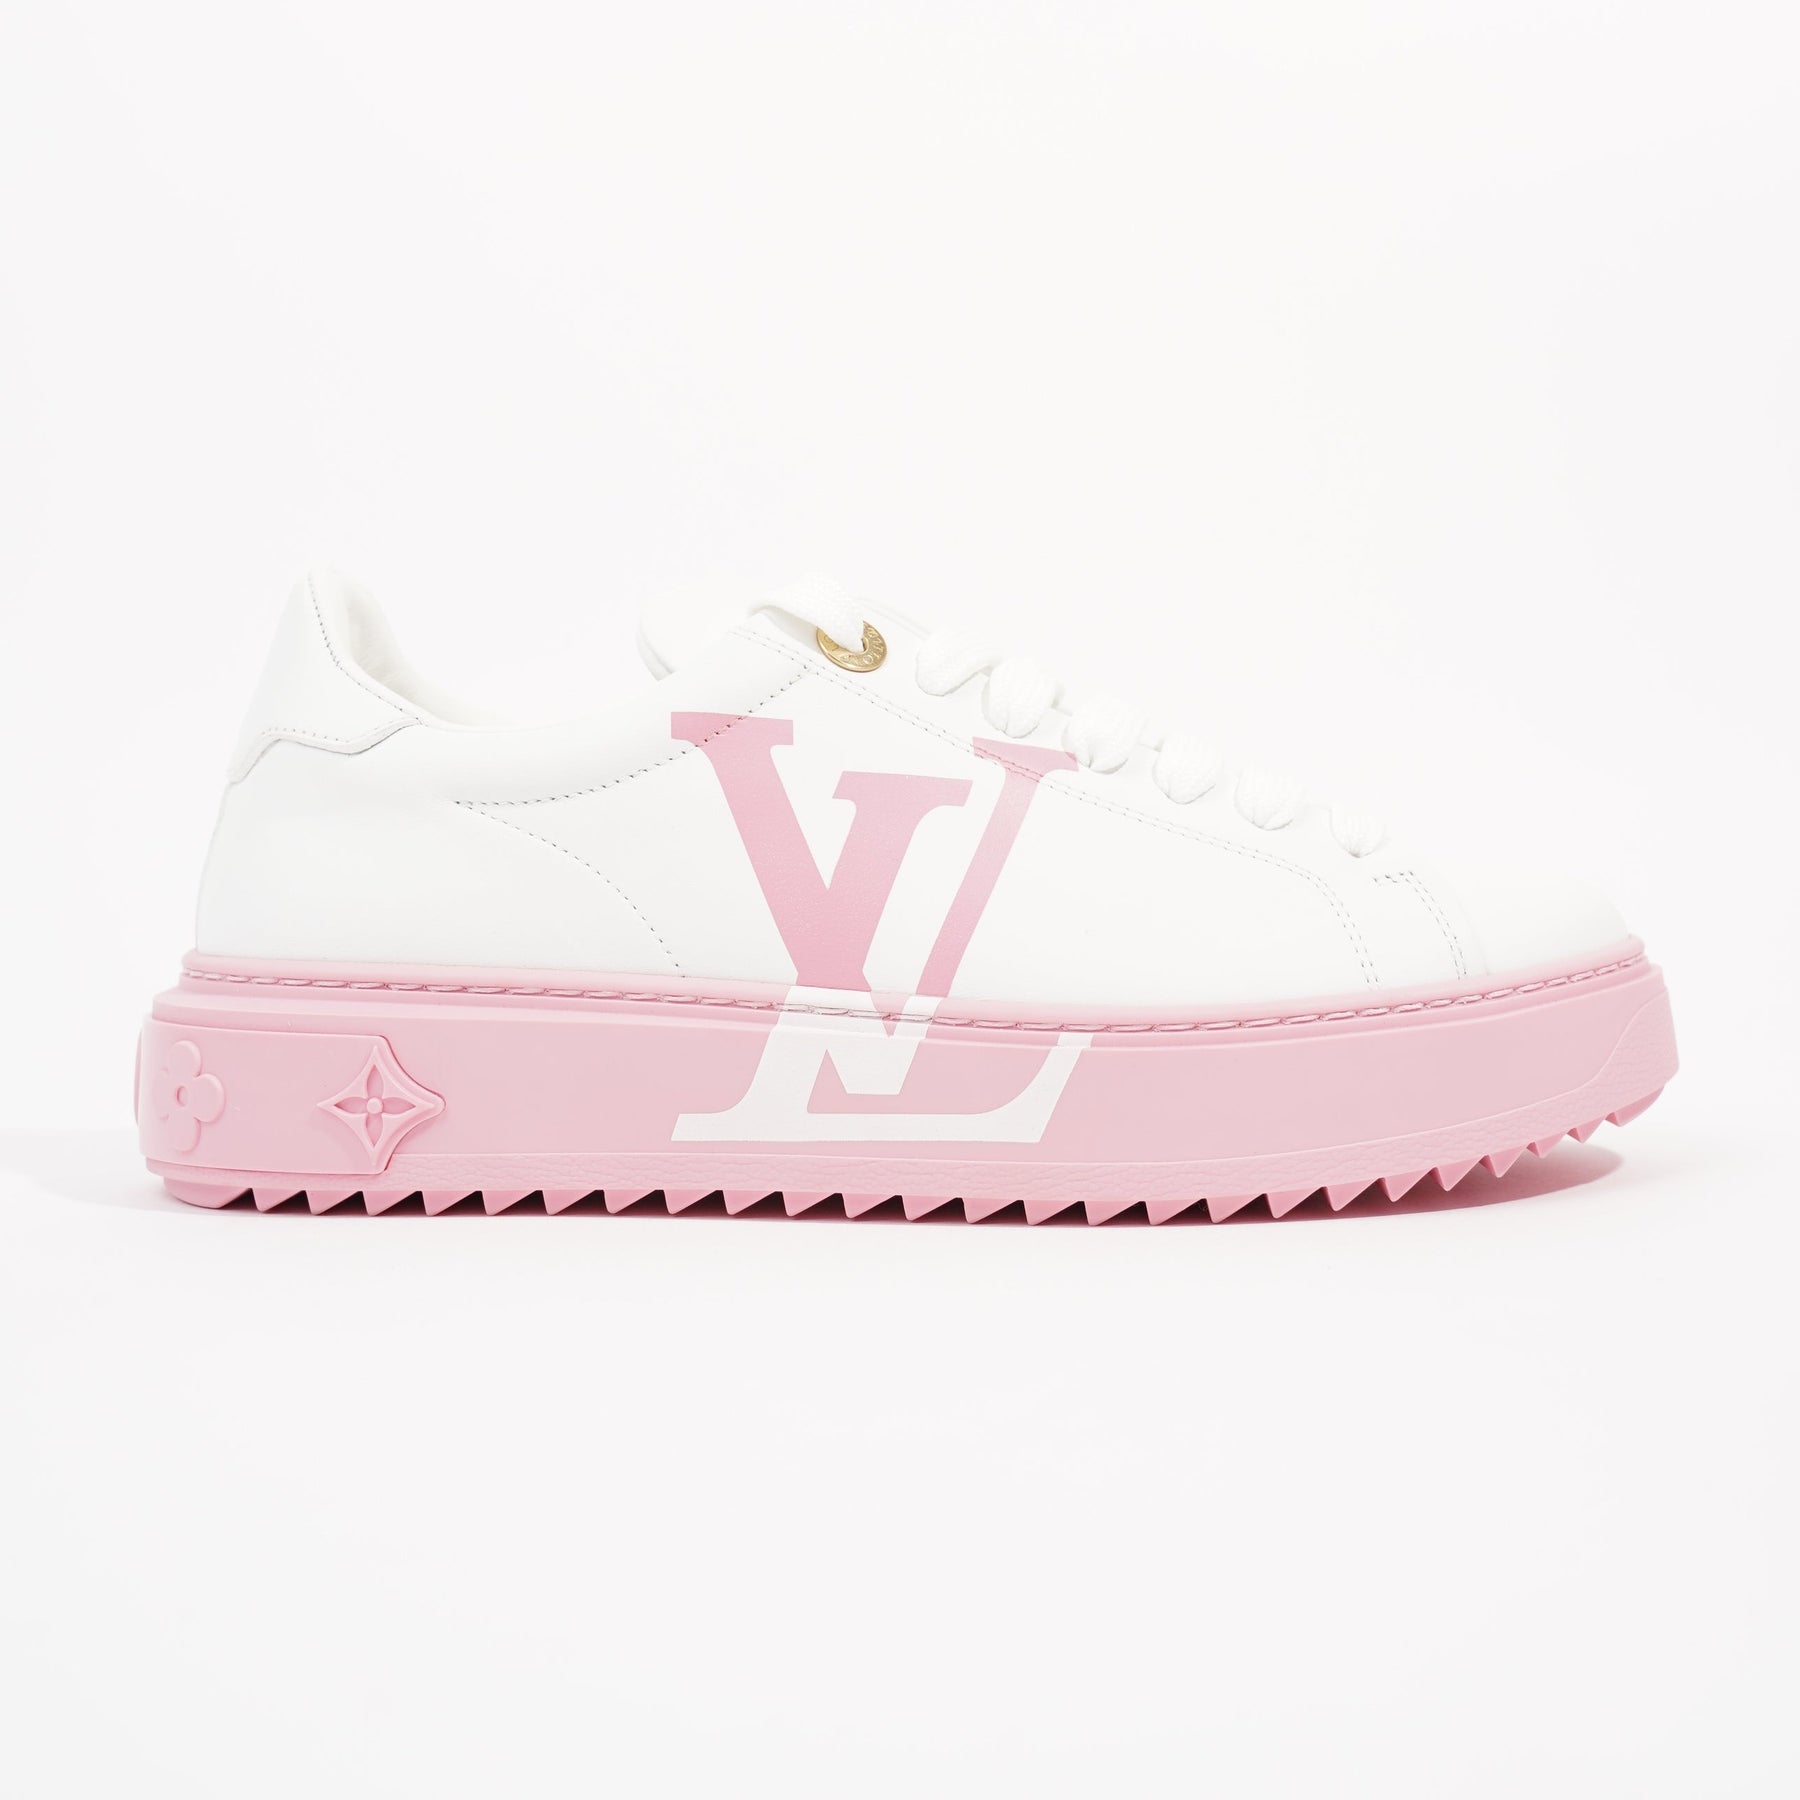 Louis Vuitton LV Trainer White pink Size 37 to 41